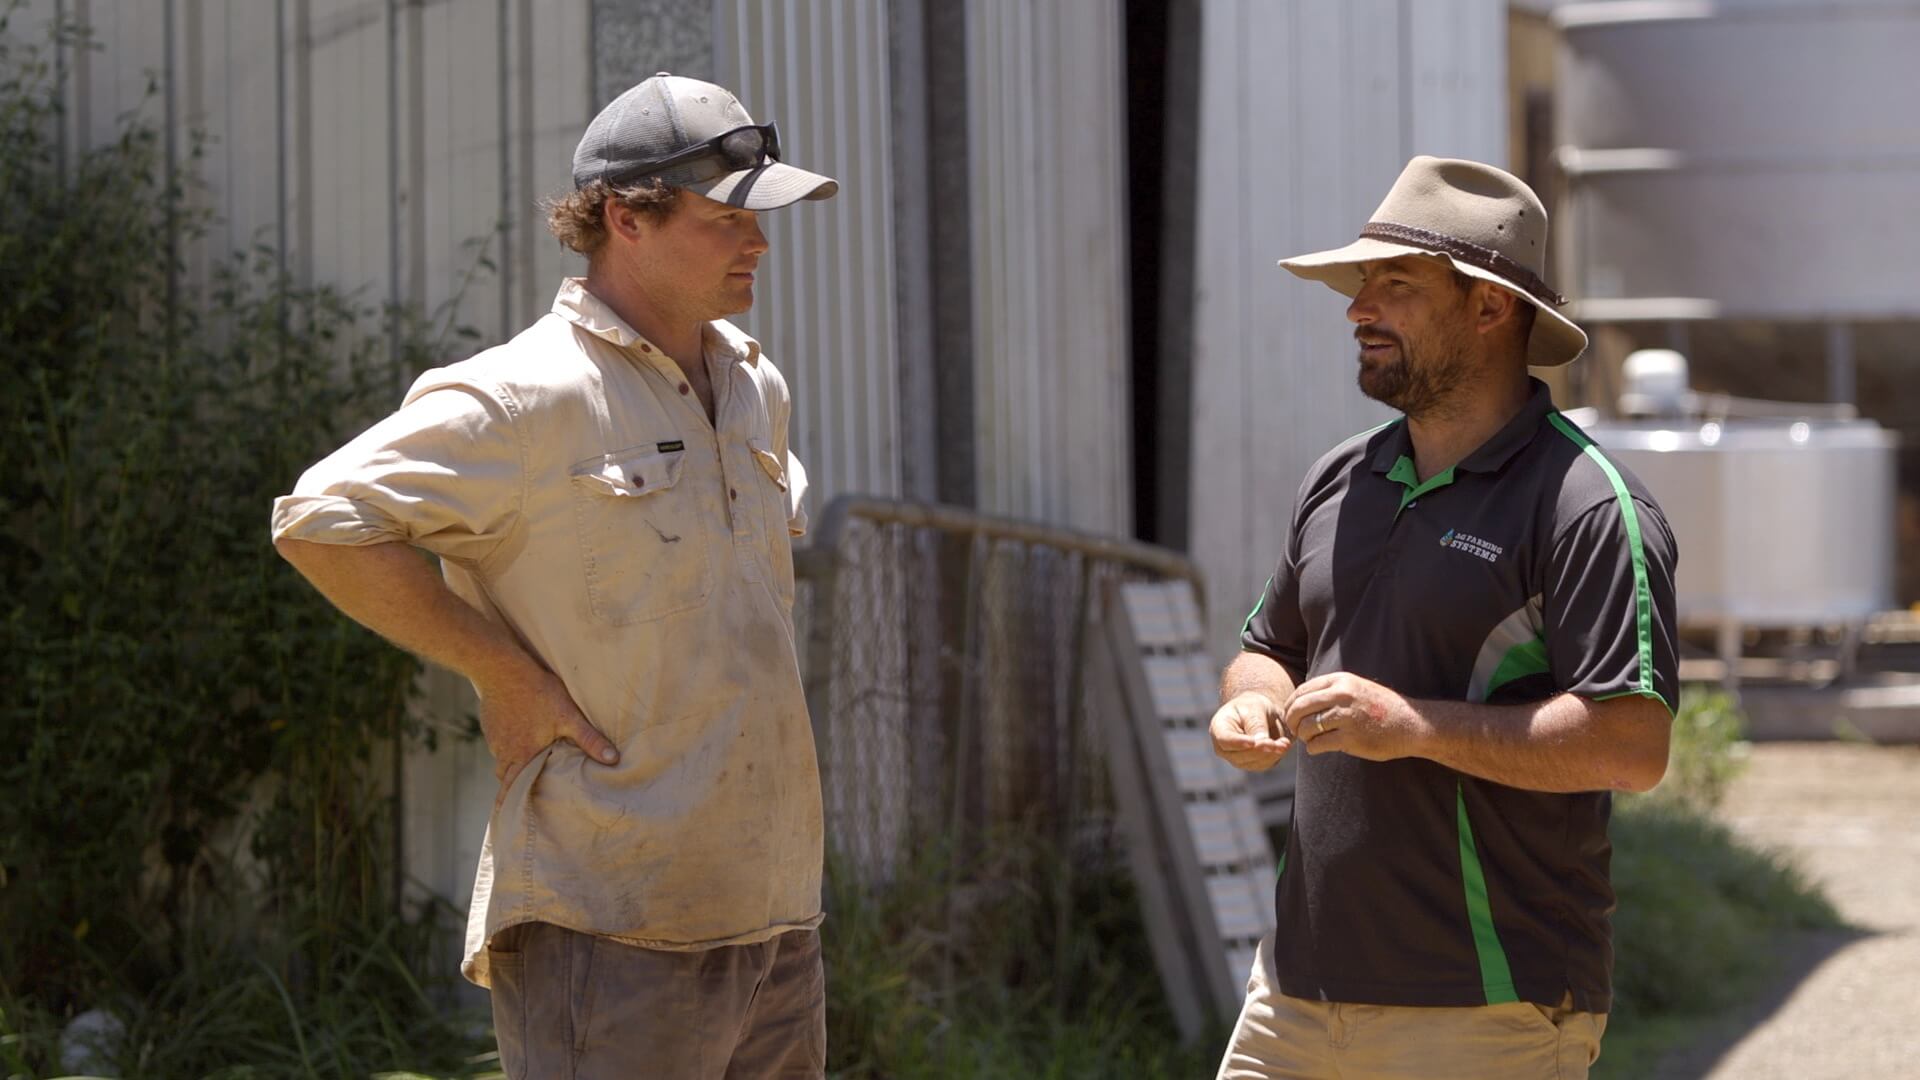 Two men standing looking at one another talking. There are sheds and silos in the background that are blurred out and a shed behind the men that has a bush and long grass growing against it with an old farm gate leaning up against the wall